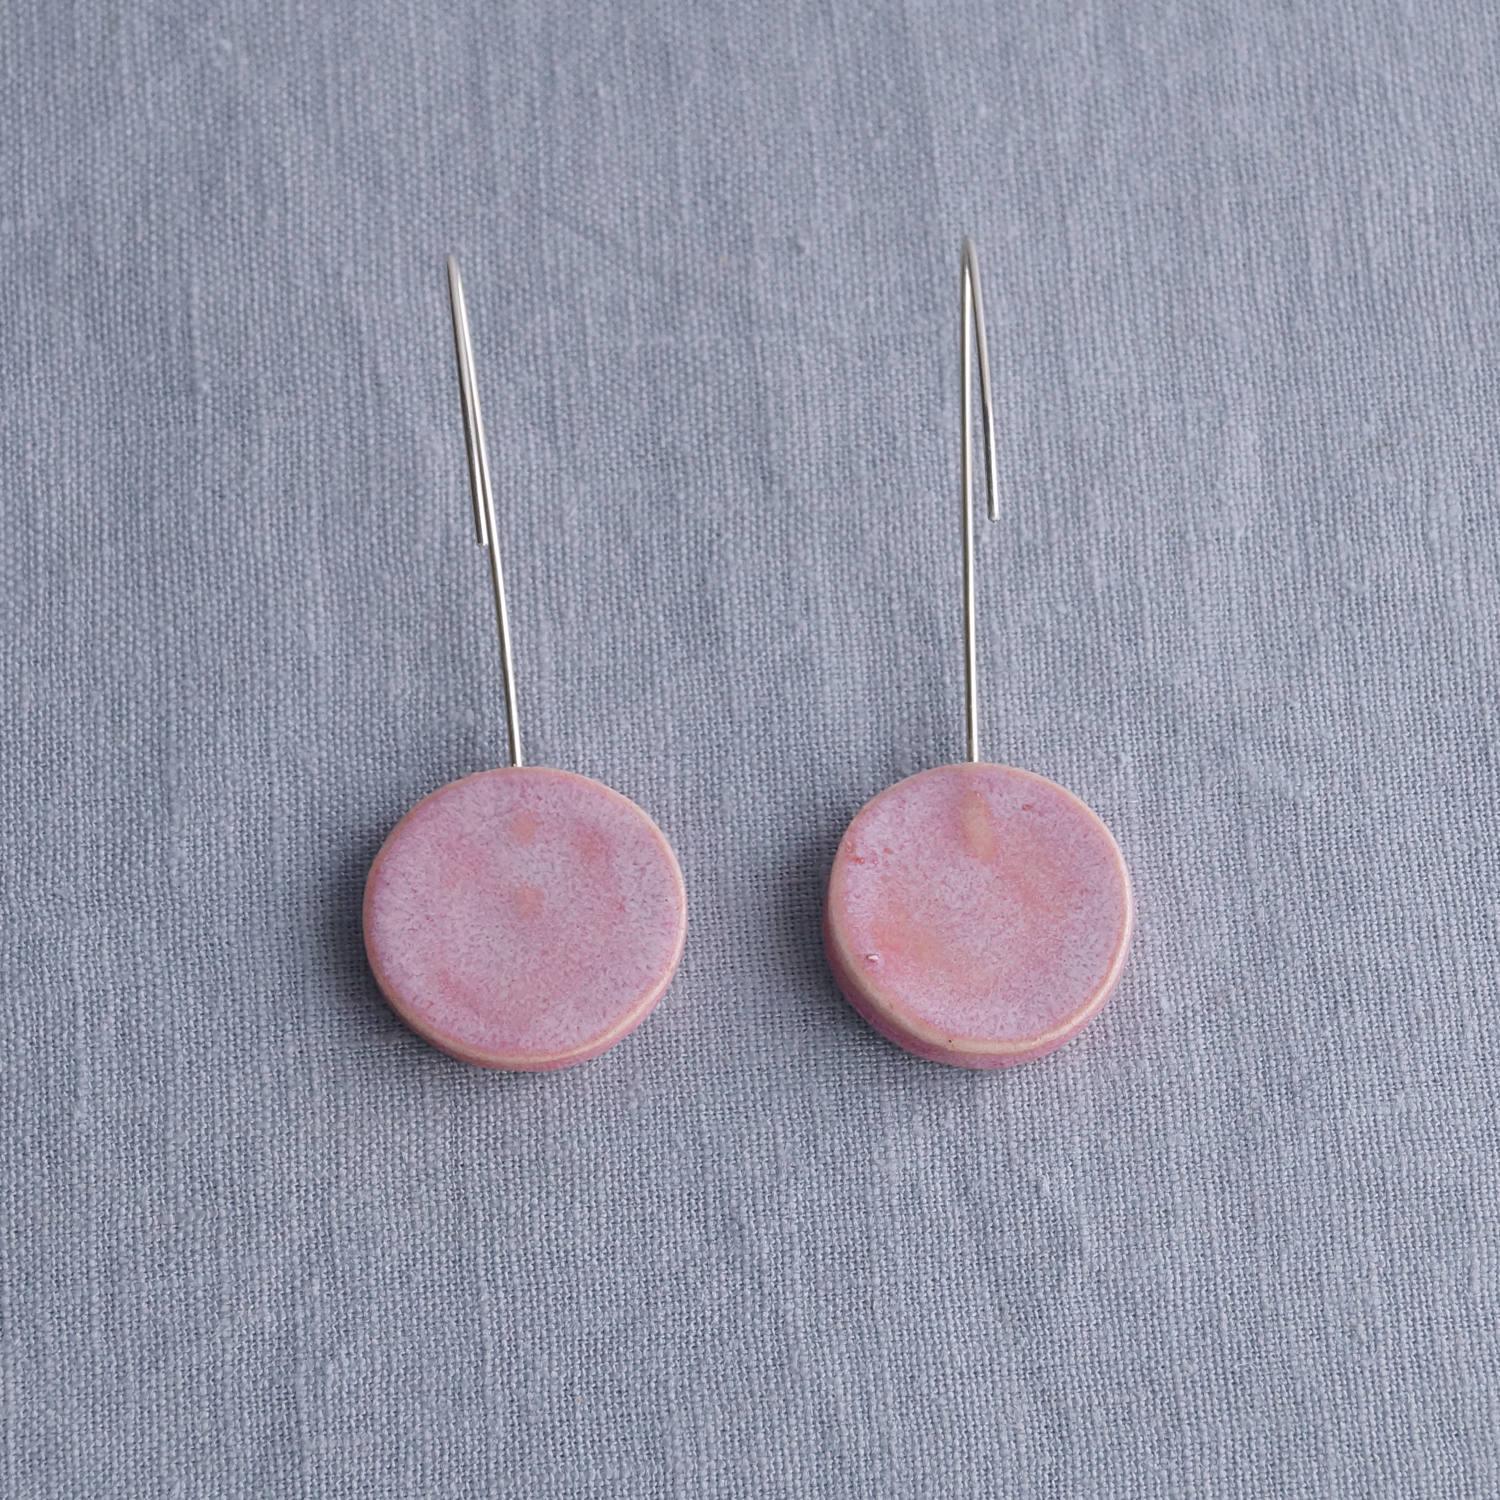 RUCHED circle earrings, porcelain earrings, satin texture, pink glaze, 925 sterling silver, ear wires, Vanillakiln, statement